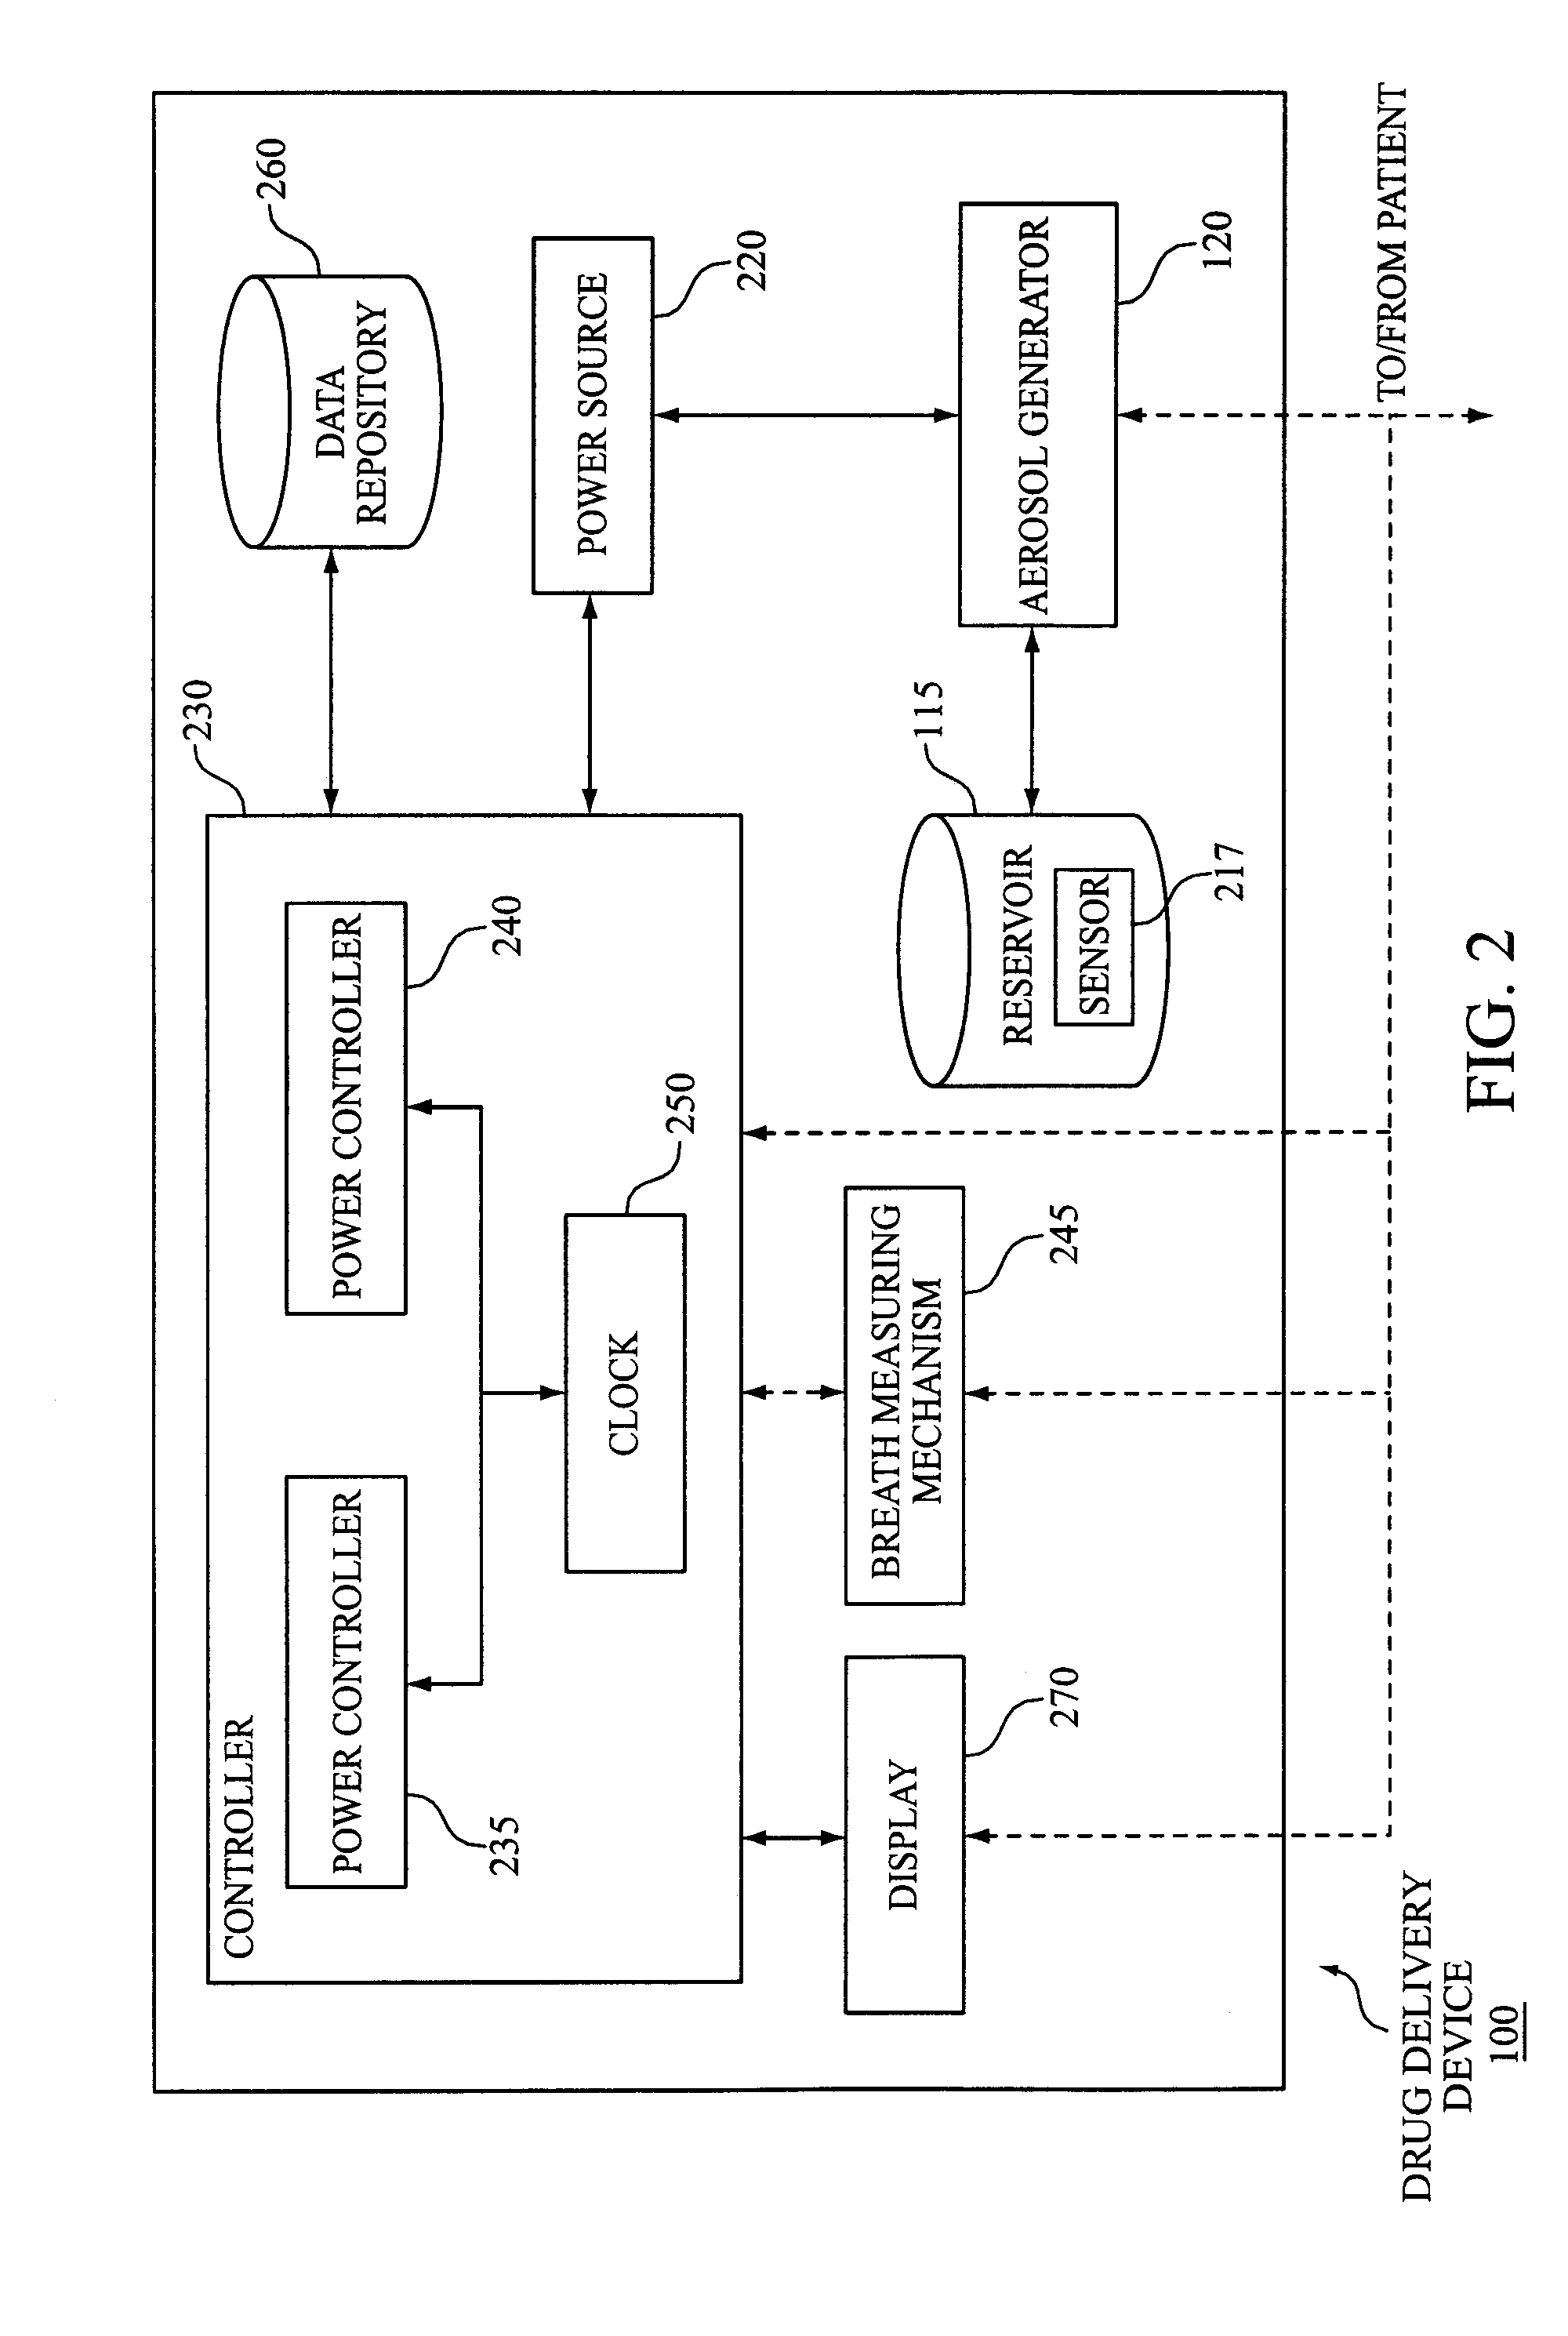 Apparatus and method for maintaining consistency for aerosol drug delivery treatments